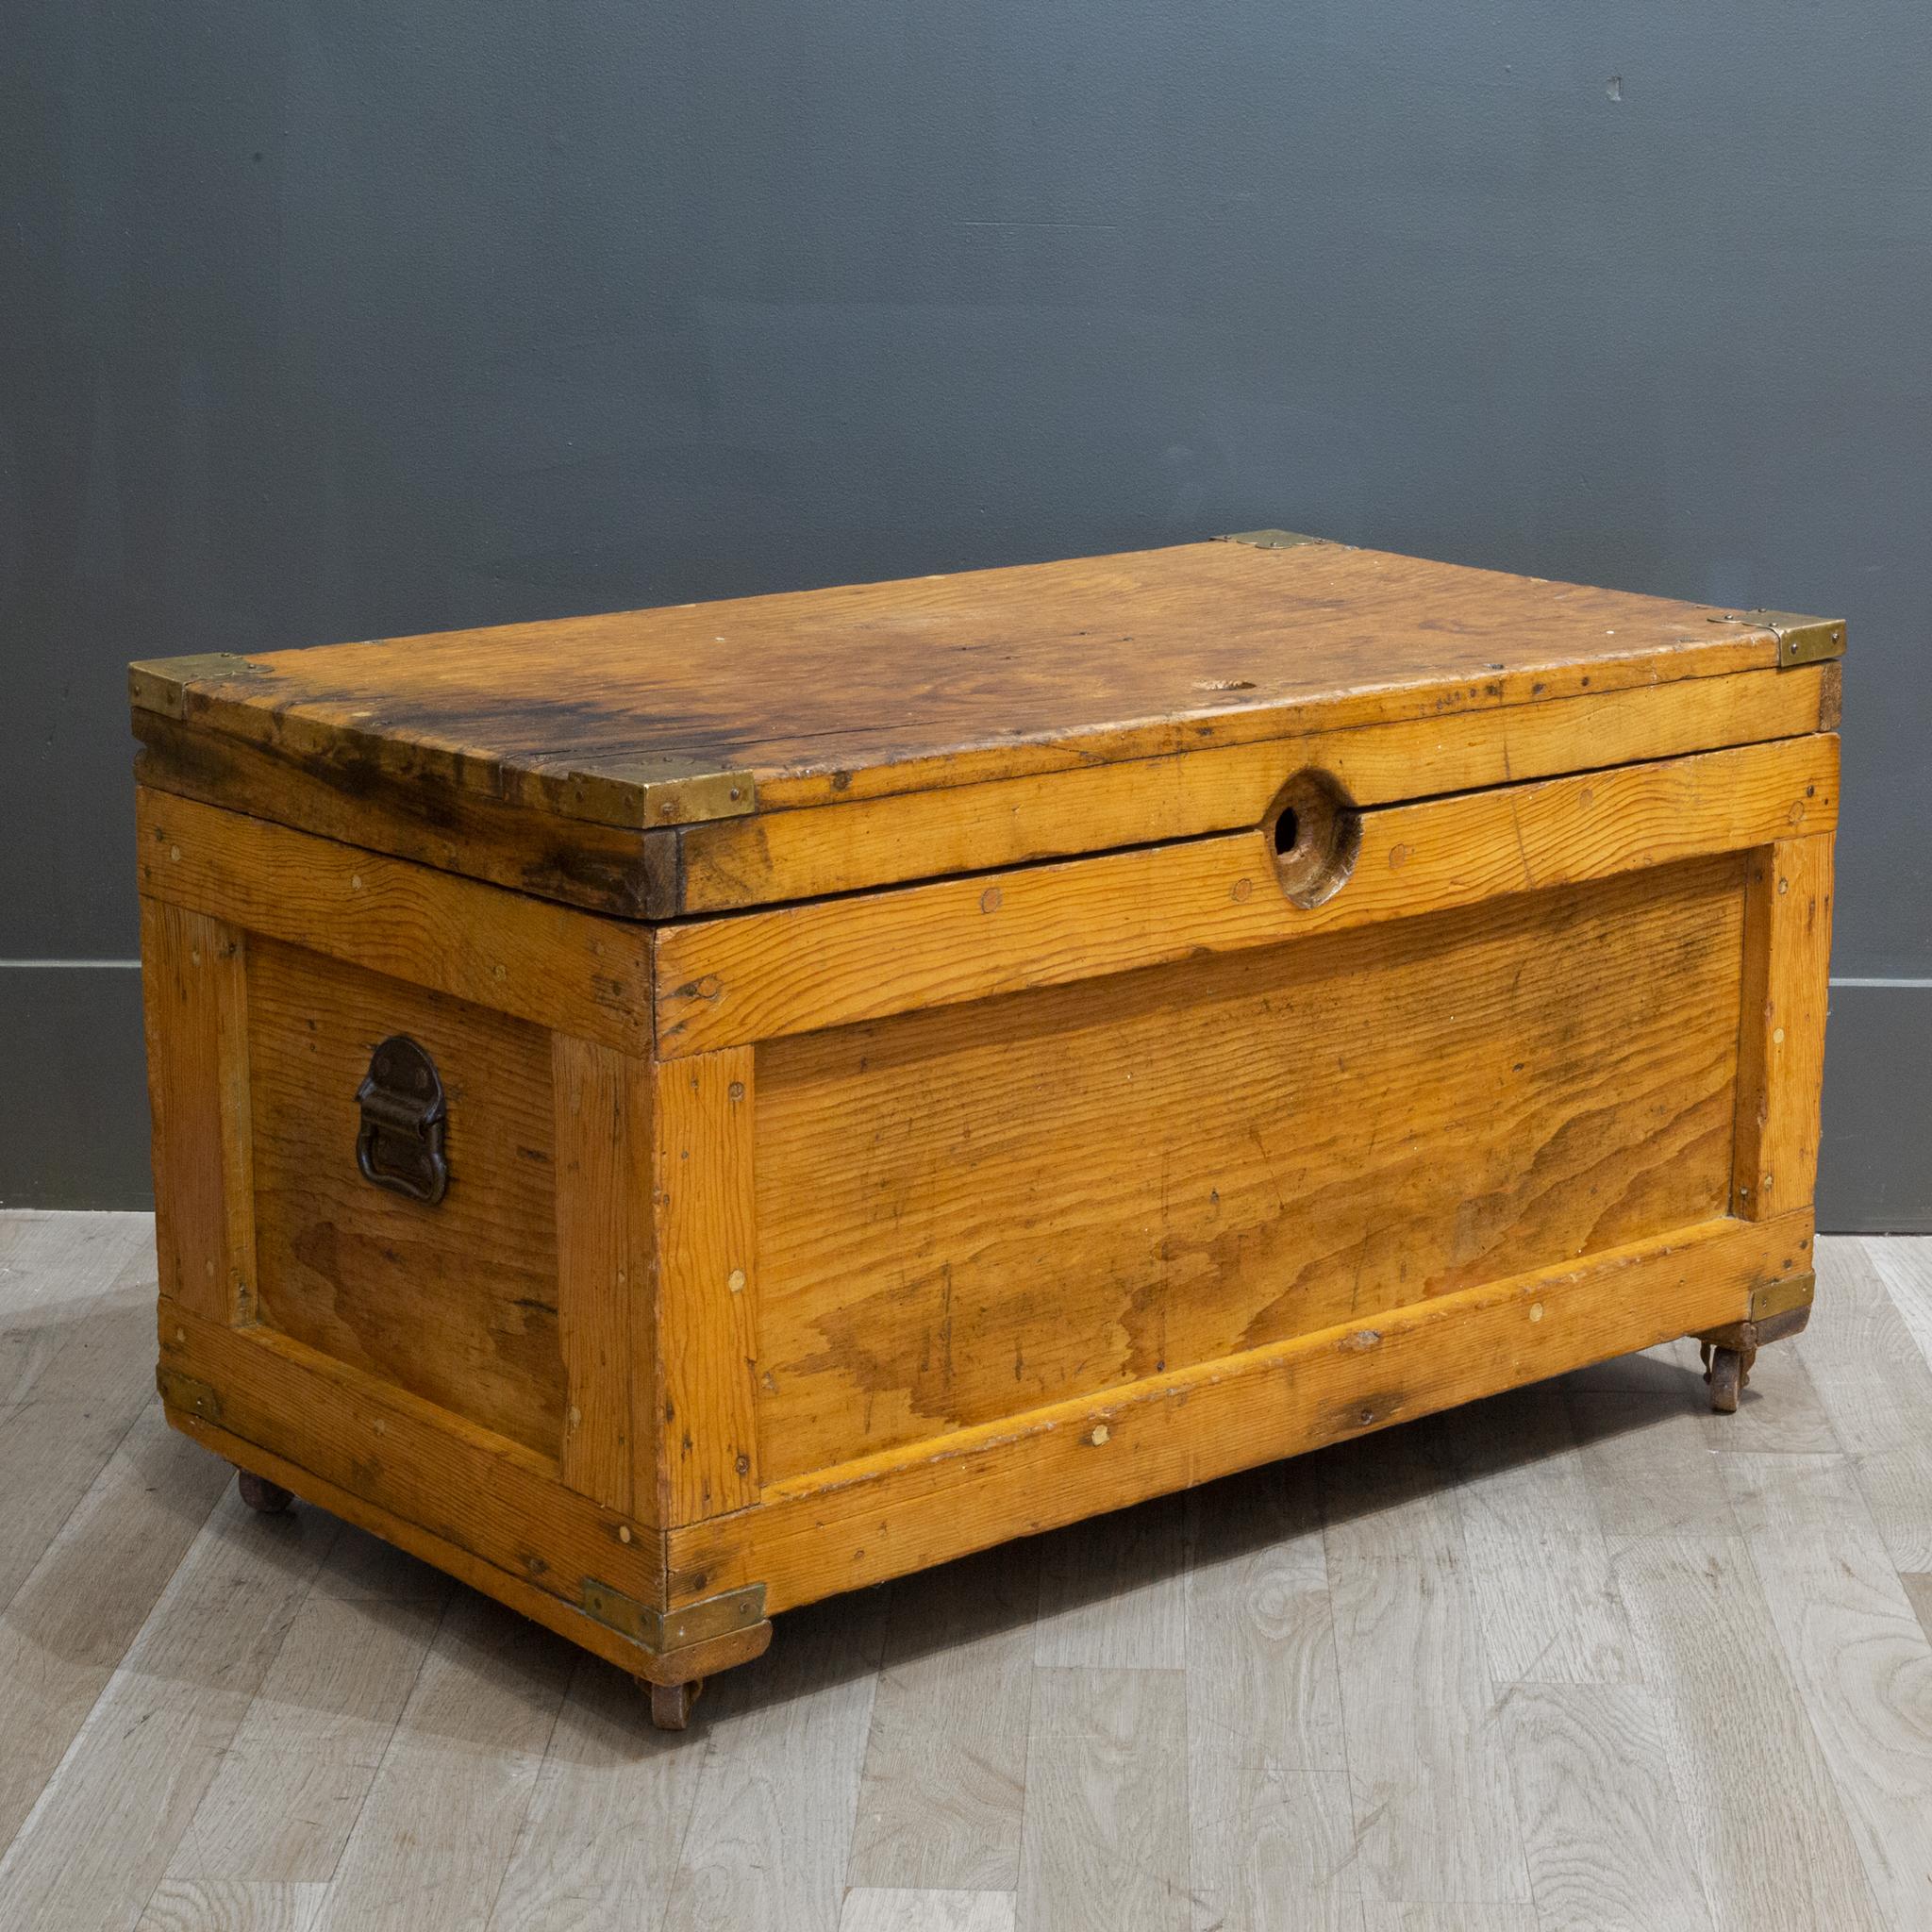 About:

A rustic oak chest on casters with inner compartment, cast iron handles and brass corners. Refinished in an oil and wax finish.

   

Creator: unknown.
Date of manufacture: c.1940.
Materials and techniques: wood, steel, cast iron.
